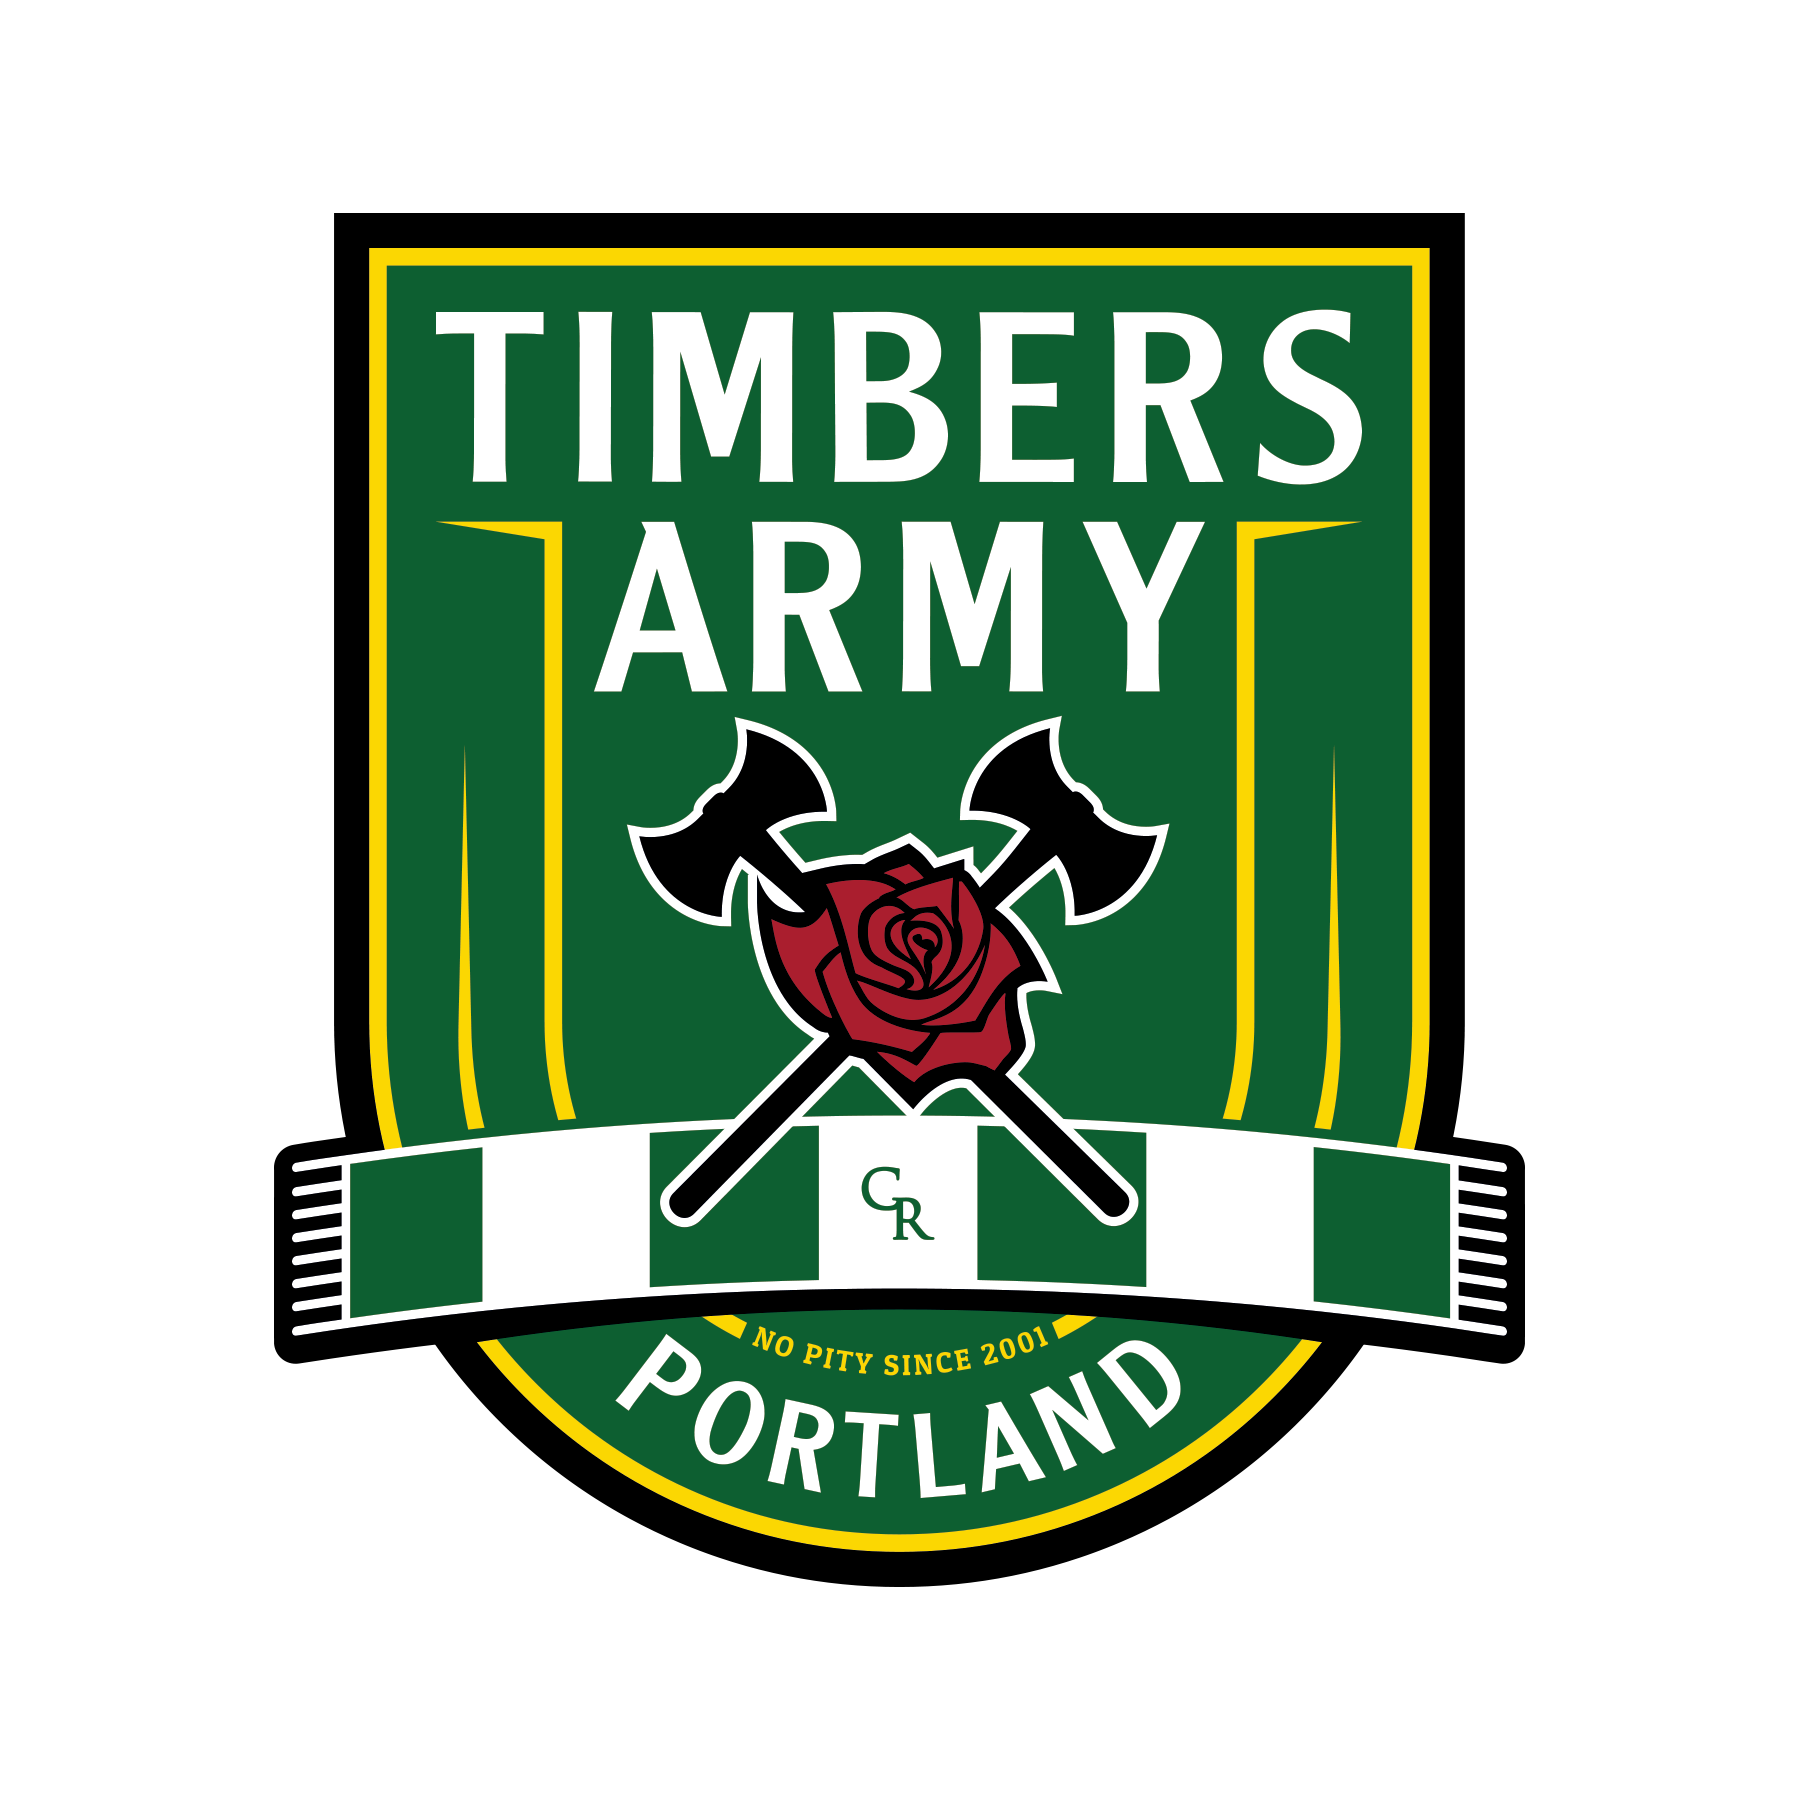 The Timbers Army Crest